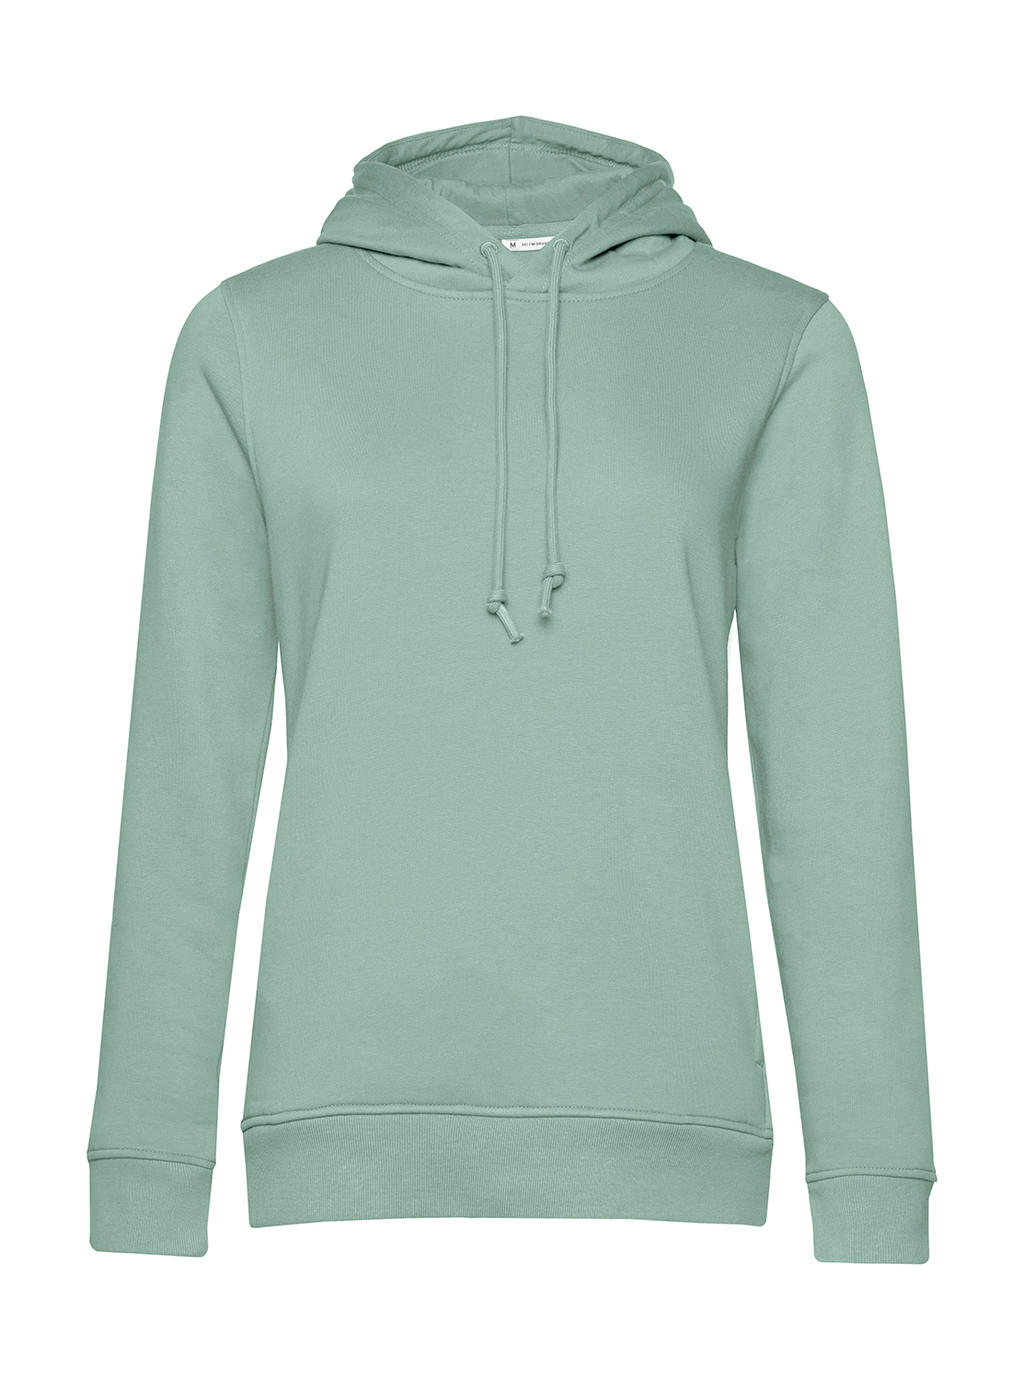  Organic Inspire Hooded /women_? in Farbe Sage